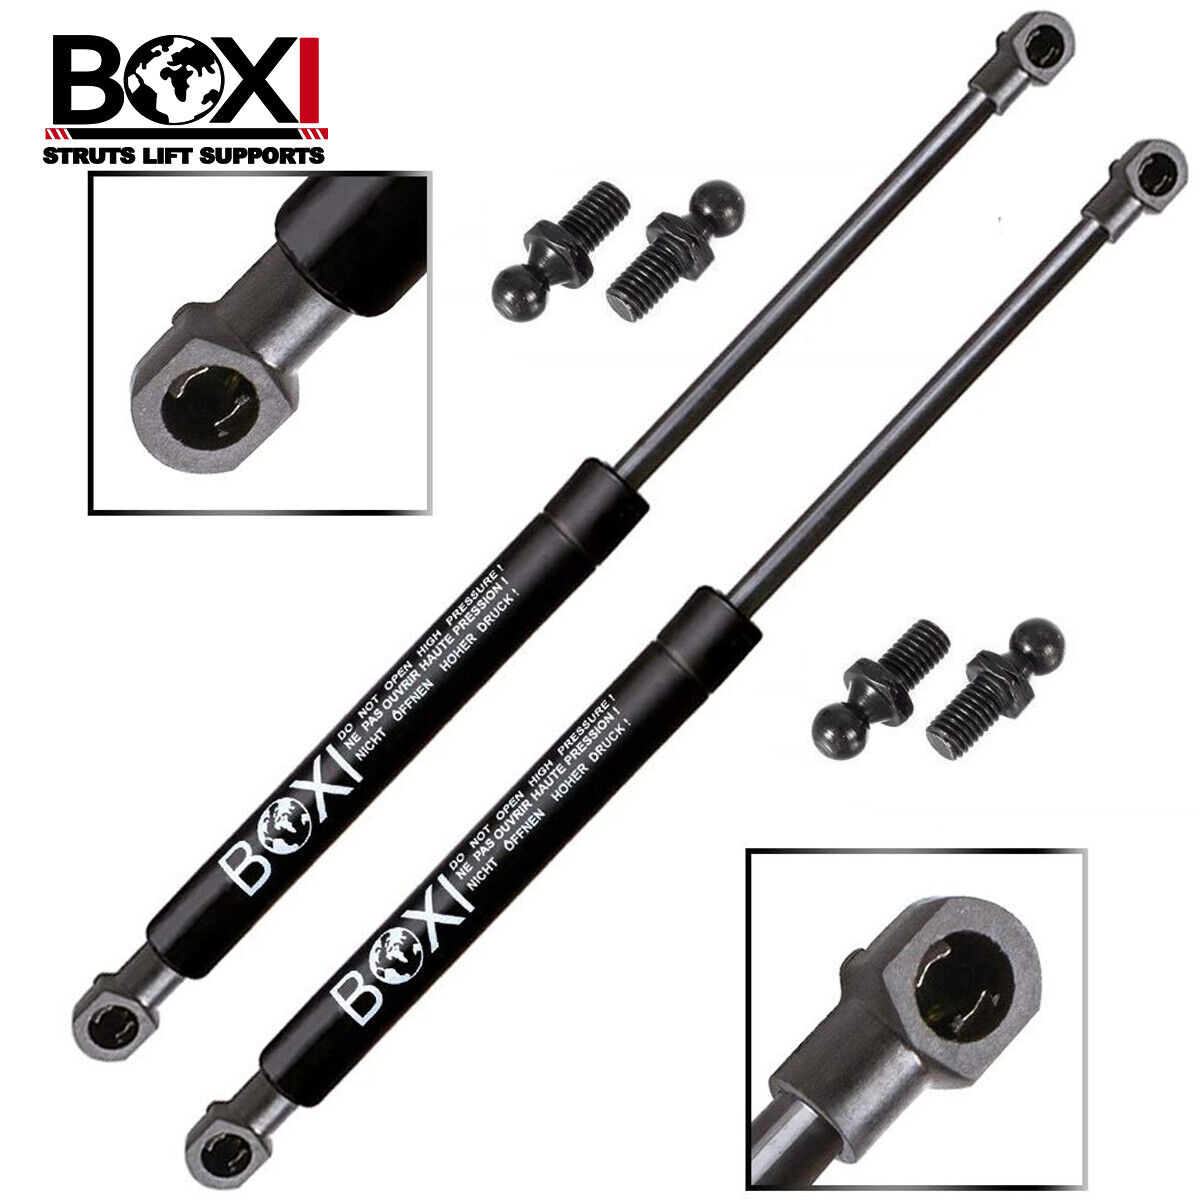 QTY2 HOOD SG329001 LIFT STRUTS SUPPORTS GAS CYLINDER KIT FOR TOYOTA SUPRA CELICA